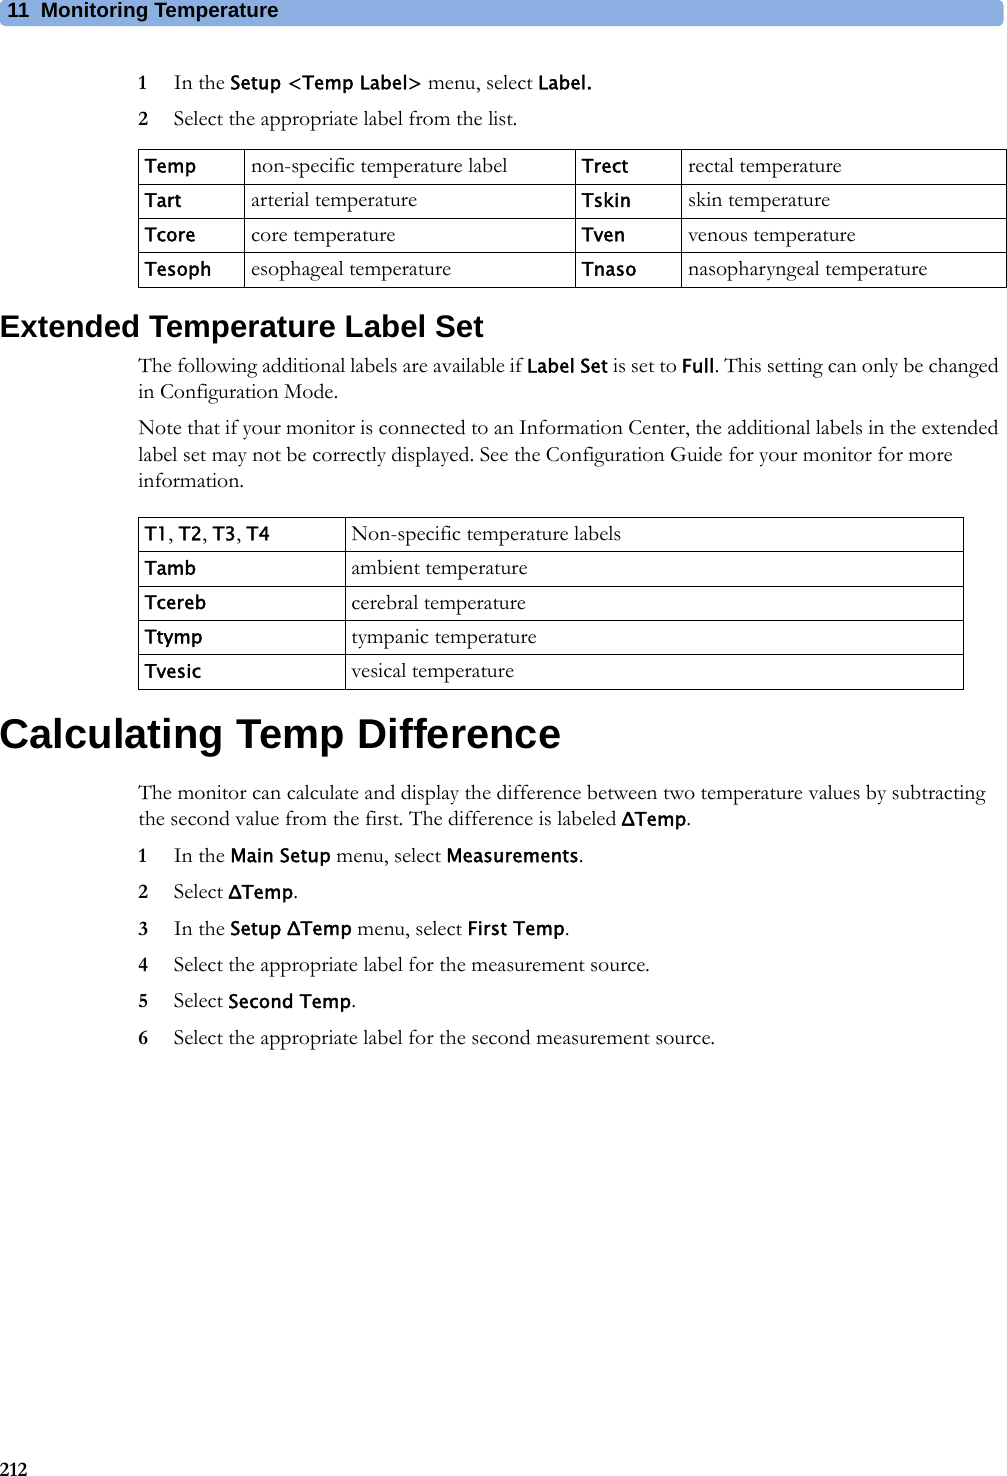 11 Monitoring Temperature2121In the Setup &lt;Temp Label&gt; menu, select Label.2Select the appropriate label from the list.Extended Temperature Label SetThe following additional labels are available if Label Set is set to Full. This setting can only be changed in Configuration Mode.Note that if your monitor is connected to an Information Center, the additional labels in the extended label set may not be correctly displayed. See the Configuration Guide for your monitor for more information.Calculating Temp DifferenceThe monitor can calculate and display the difference between two temperature values by subtracting the second value from the first. The difference is labeled ΔTemp.1In the Main Setup menu, select Measurements.2Select ΔTemp.3In the Setup ΔTemp menu, select First Temp.4Select the appropriate label for the measurement source.5Select Second Temp.6Select the appropriate label for the second measurement source.Temp non-specific temperature label Trect rectal temperatureTart arterial temperature Tskin skin temperatureTcore core temperature Tven venous temperatureTesoph esophageal temperature Tnaso nasopharyngeal temperatureT1, T2, T3, T4 Non-specific temperature labelsTamb ambient temperatureTcereb cerebral temperatureTtymp tympanic temperatureTvesic vesical temperature